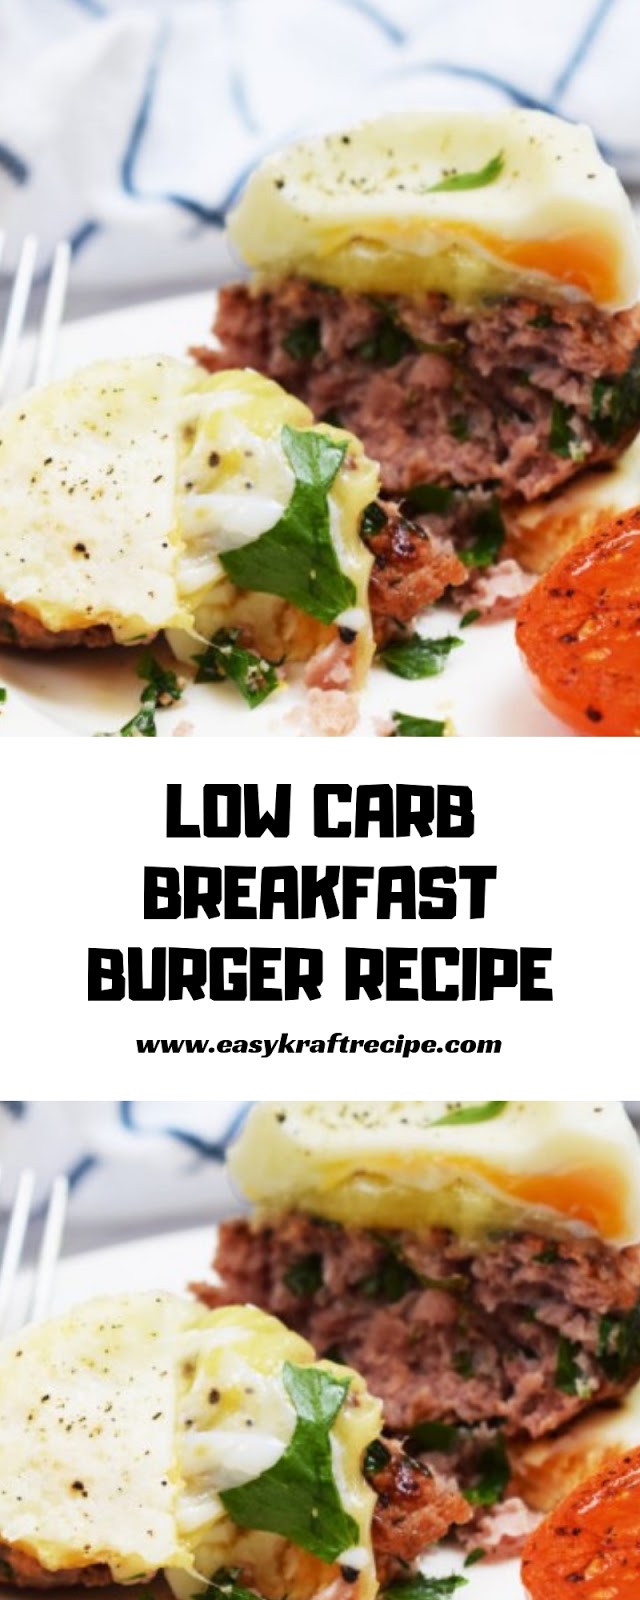 LOW CARB BREAKFAST BURGER